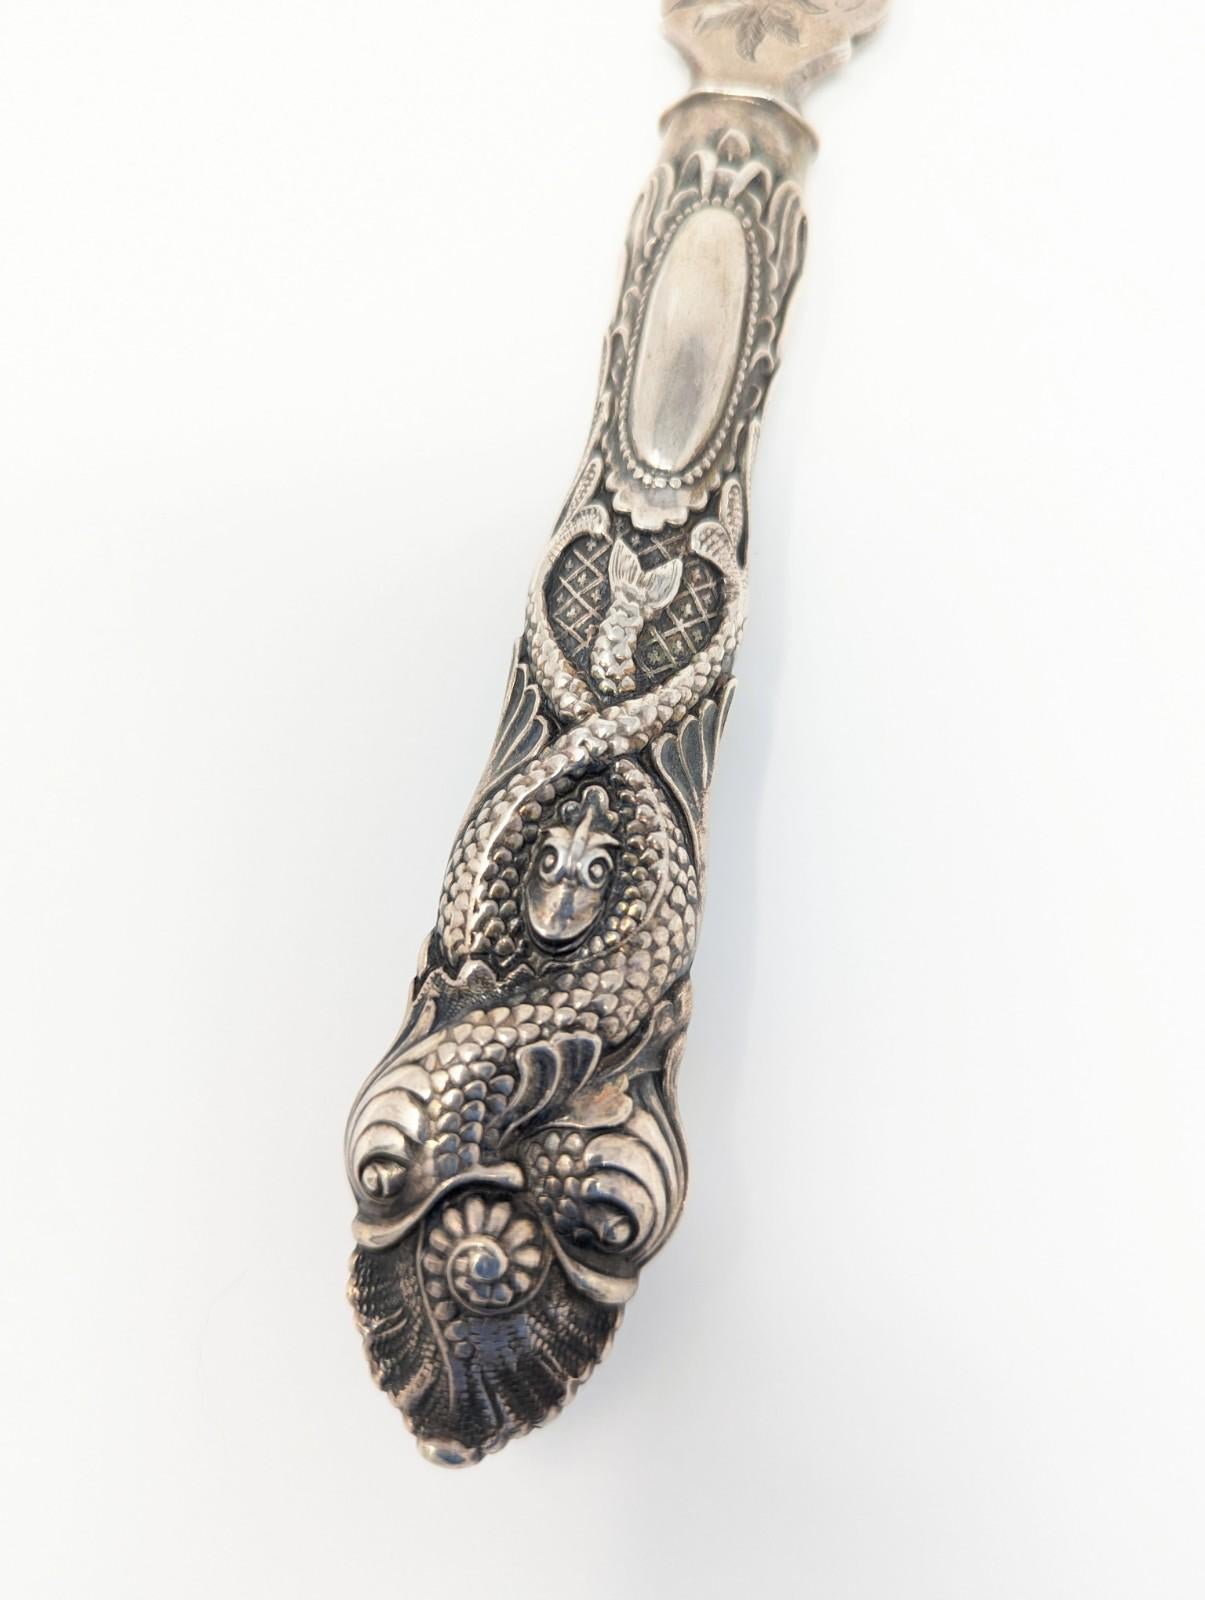 European Antique Fish Knife Unique Sea Serpent Snake Sterling Silver French Cake Etched For Sale